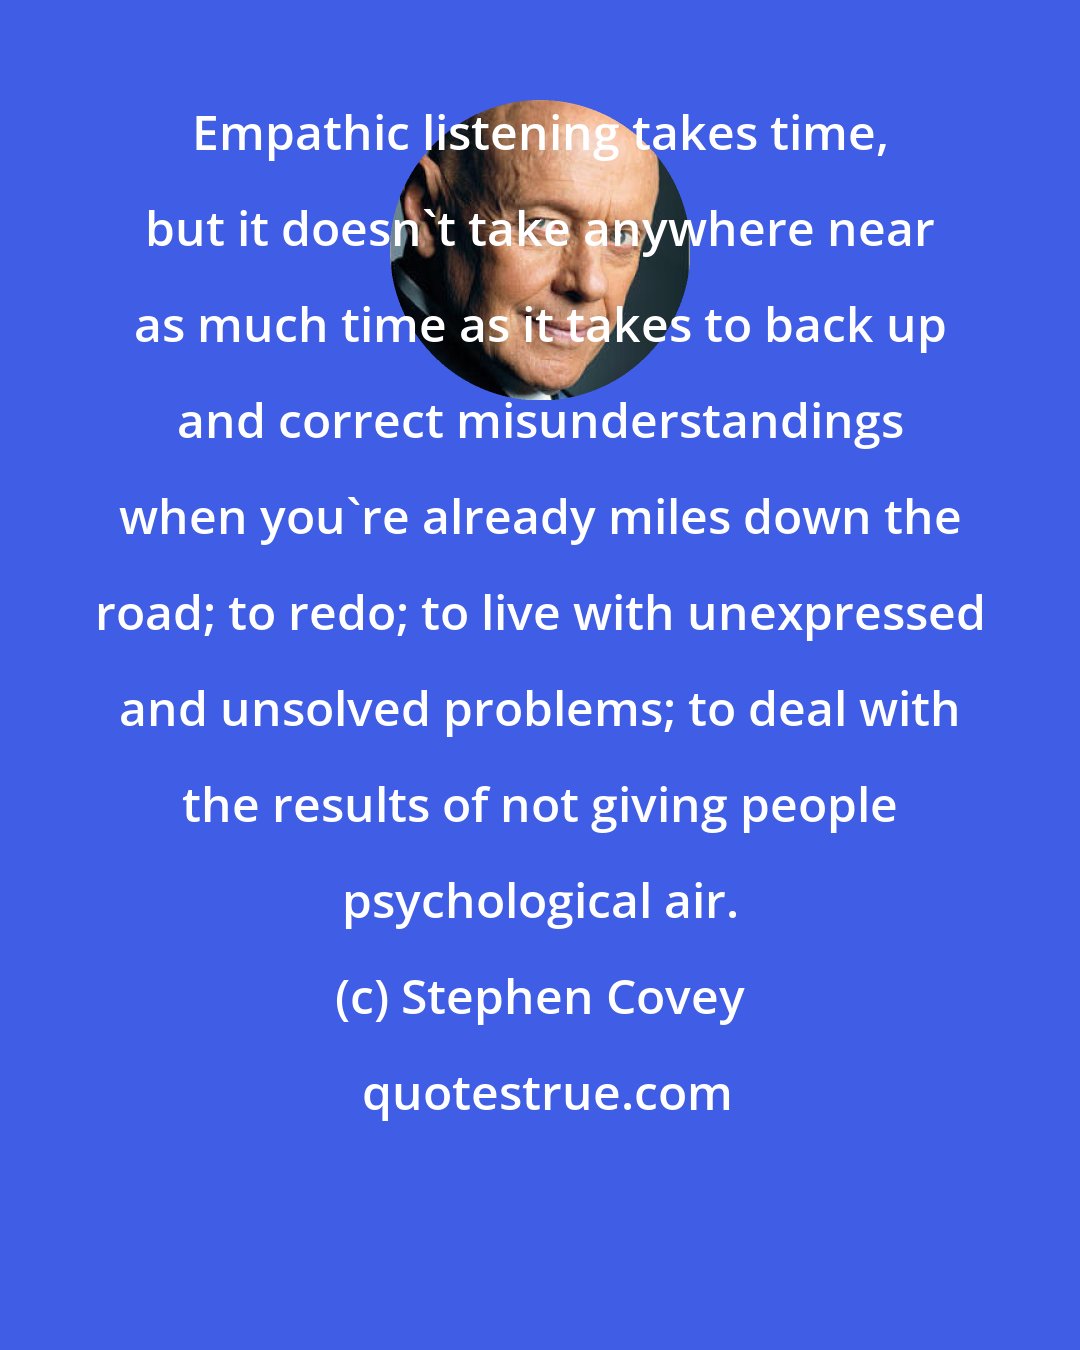 Stephen Covey: Empathic listening takes time, but it doesn't take anywhere near as much time as it takes to back up and correct misunderstandings when you're already miles down the road; to redo; to live with unexpressed and unsolved problems; to deal with the results of not giving people psychological air.